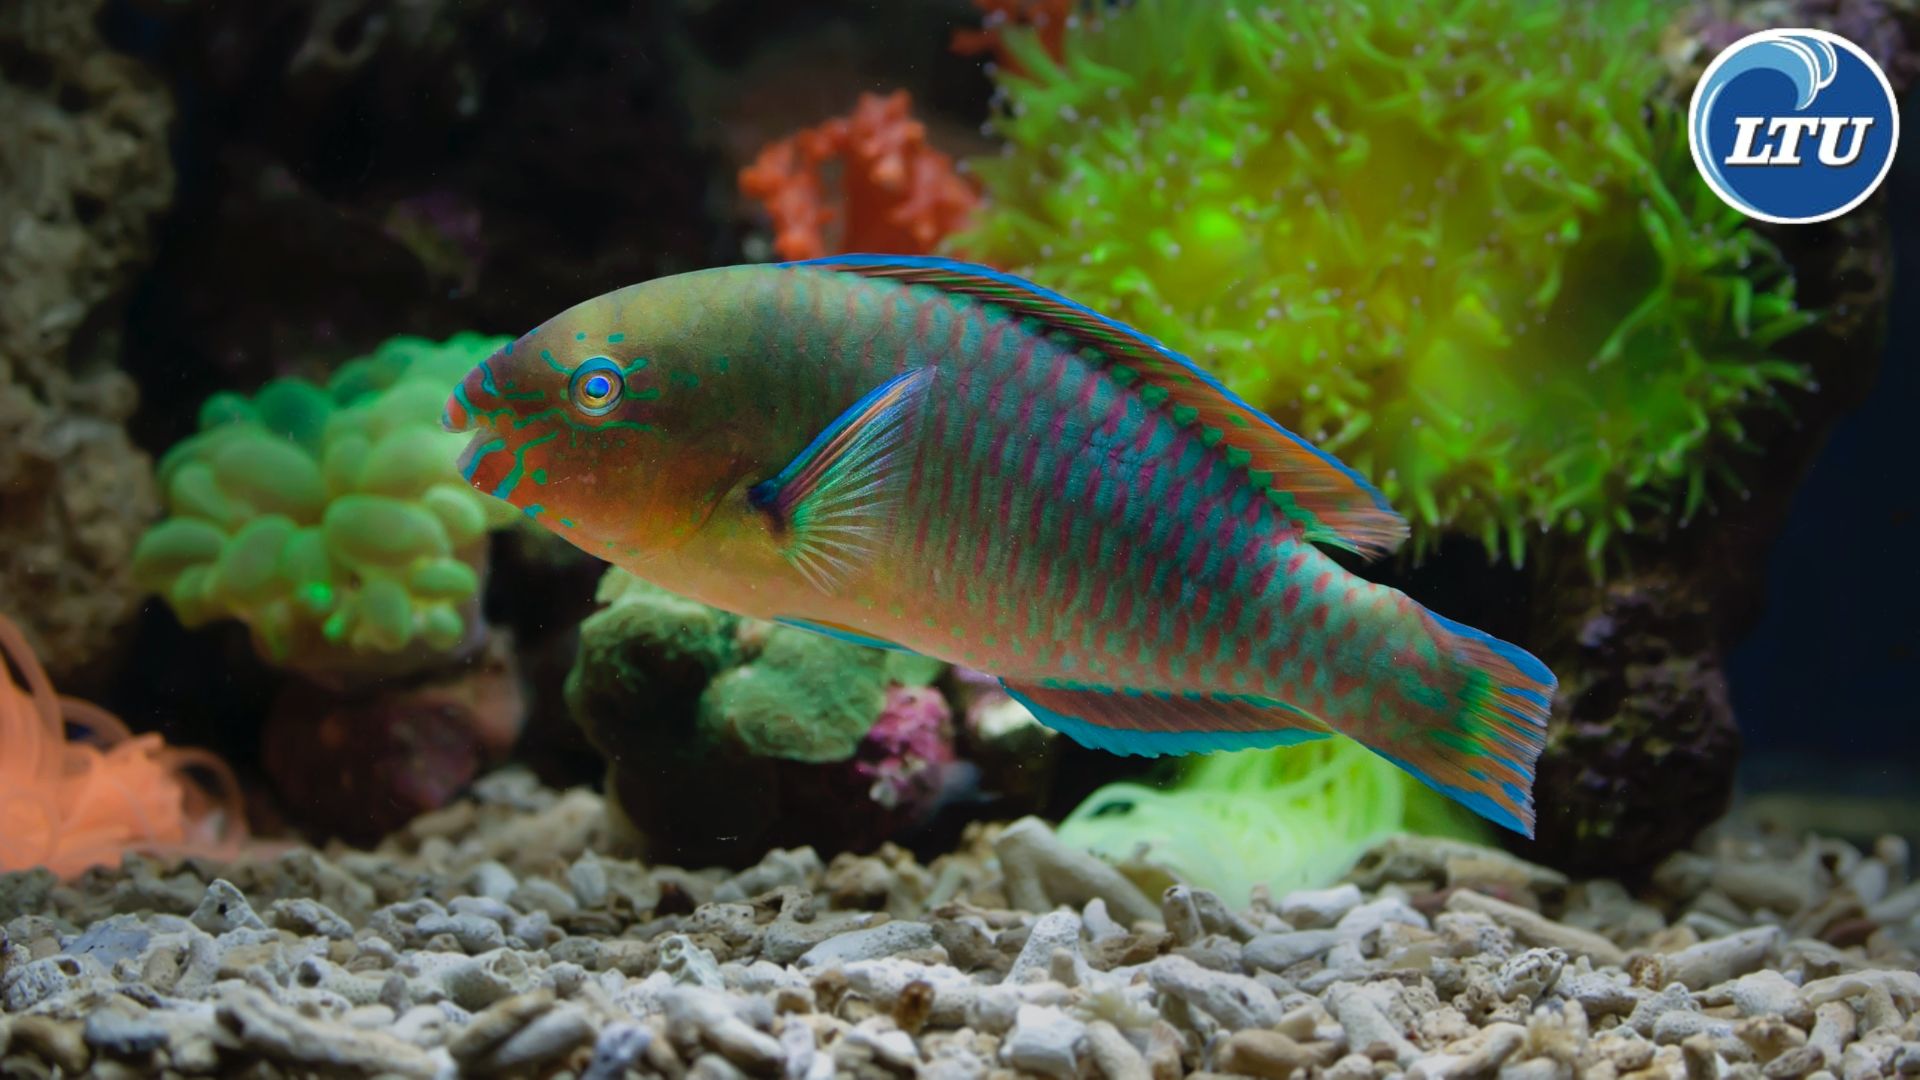 Here's what Parrotfish do to the Environment